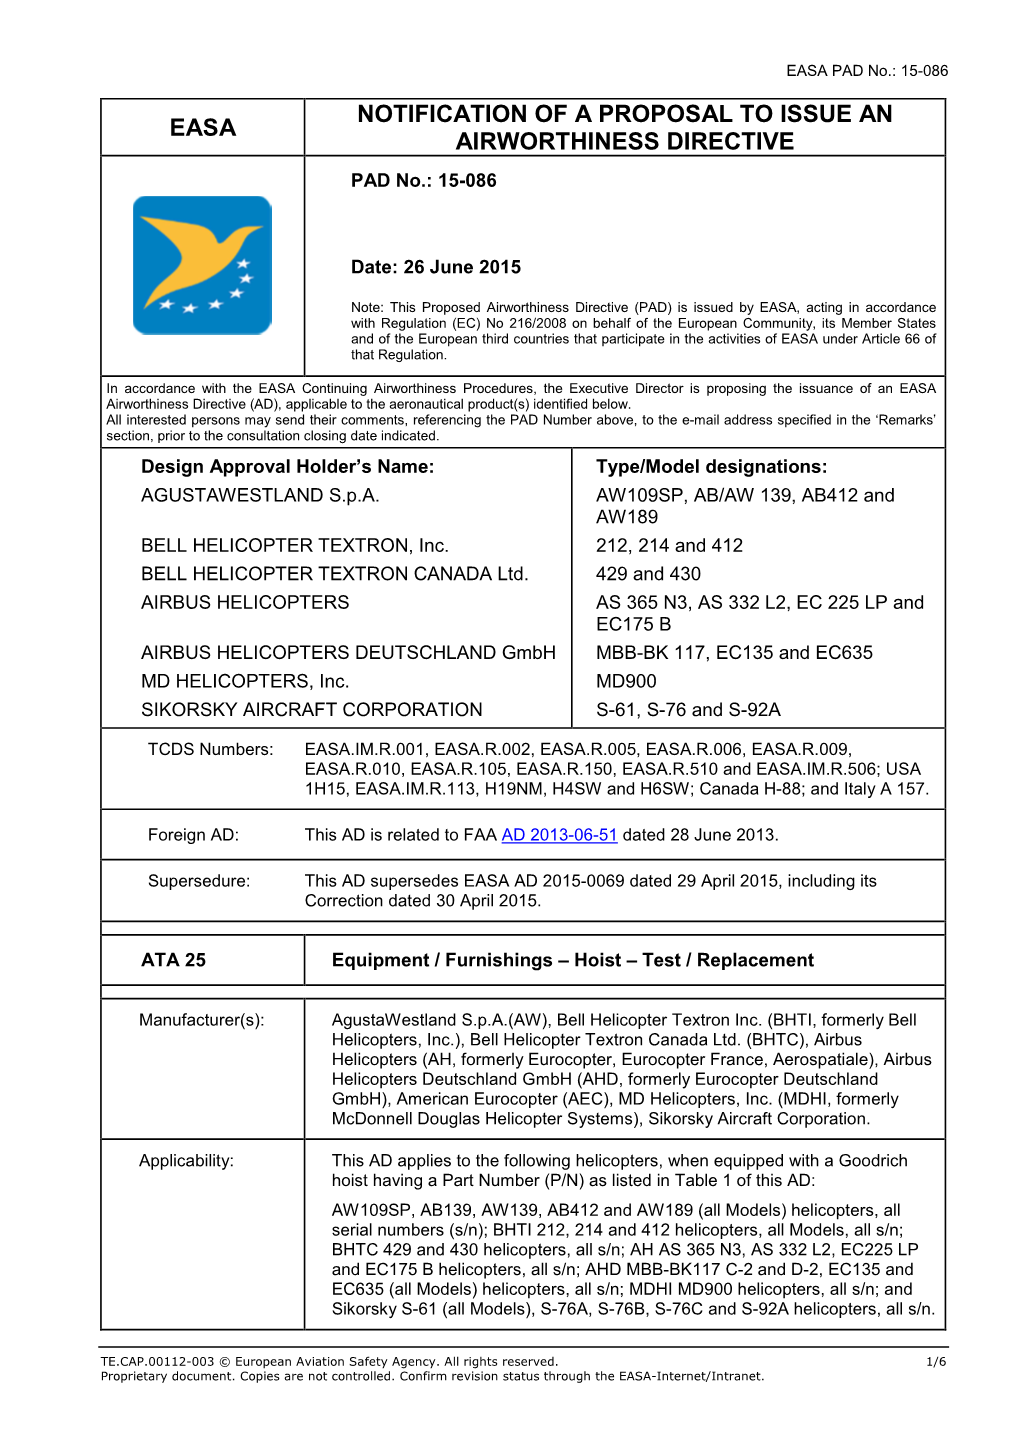 Easa Notification of a Proposal to Issue An